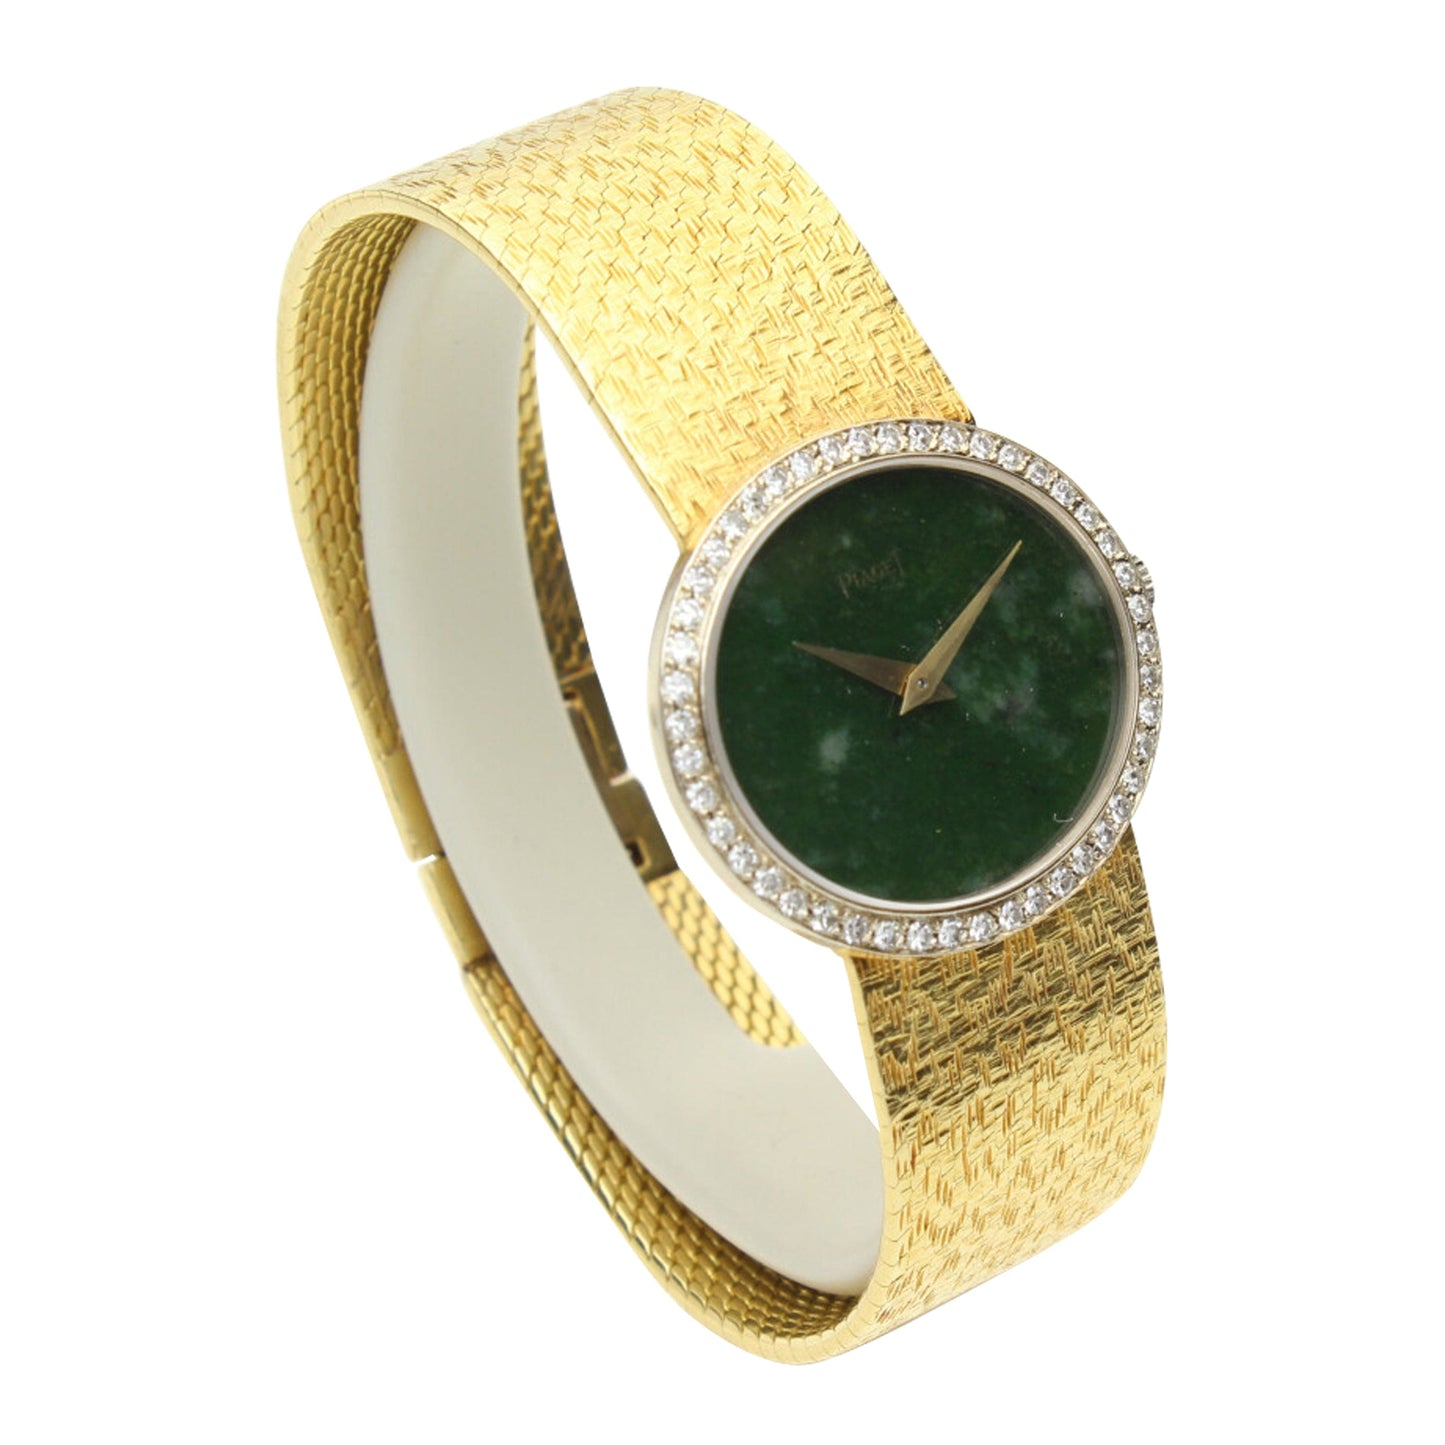 18ct yellow gold, diamond set and Nephrite dial bracelet watch. Made 1970's